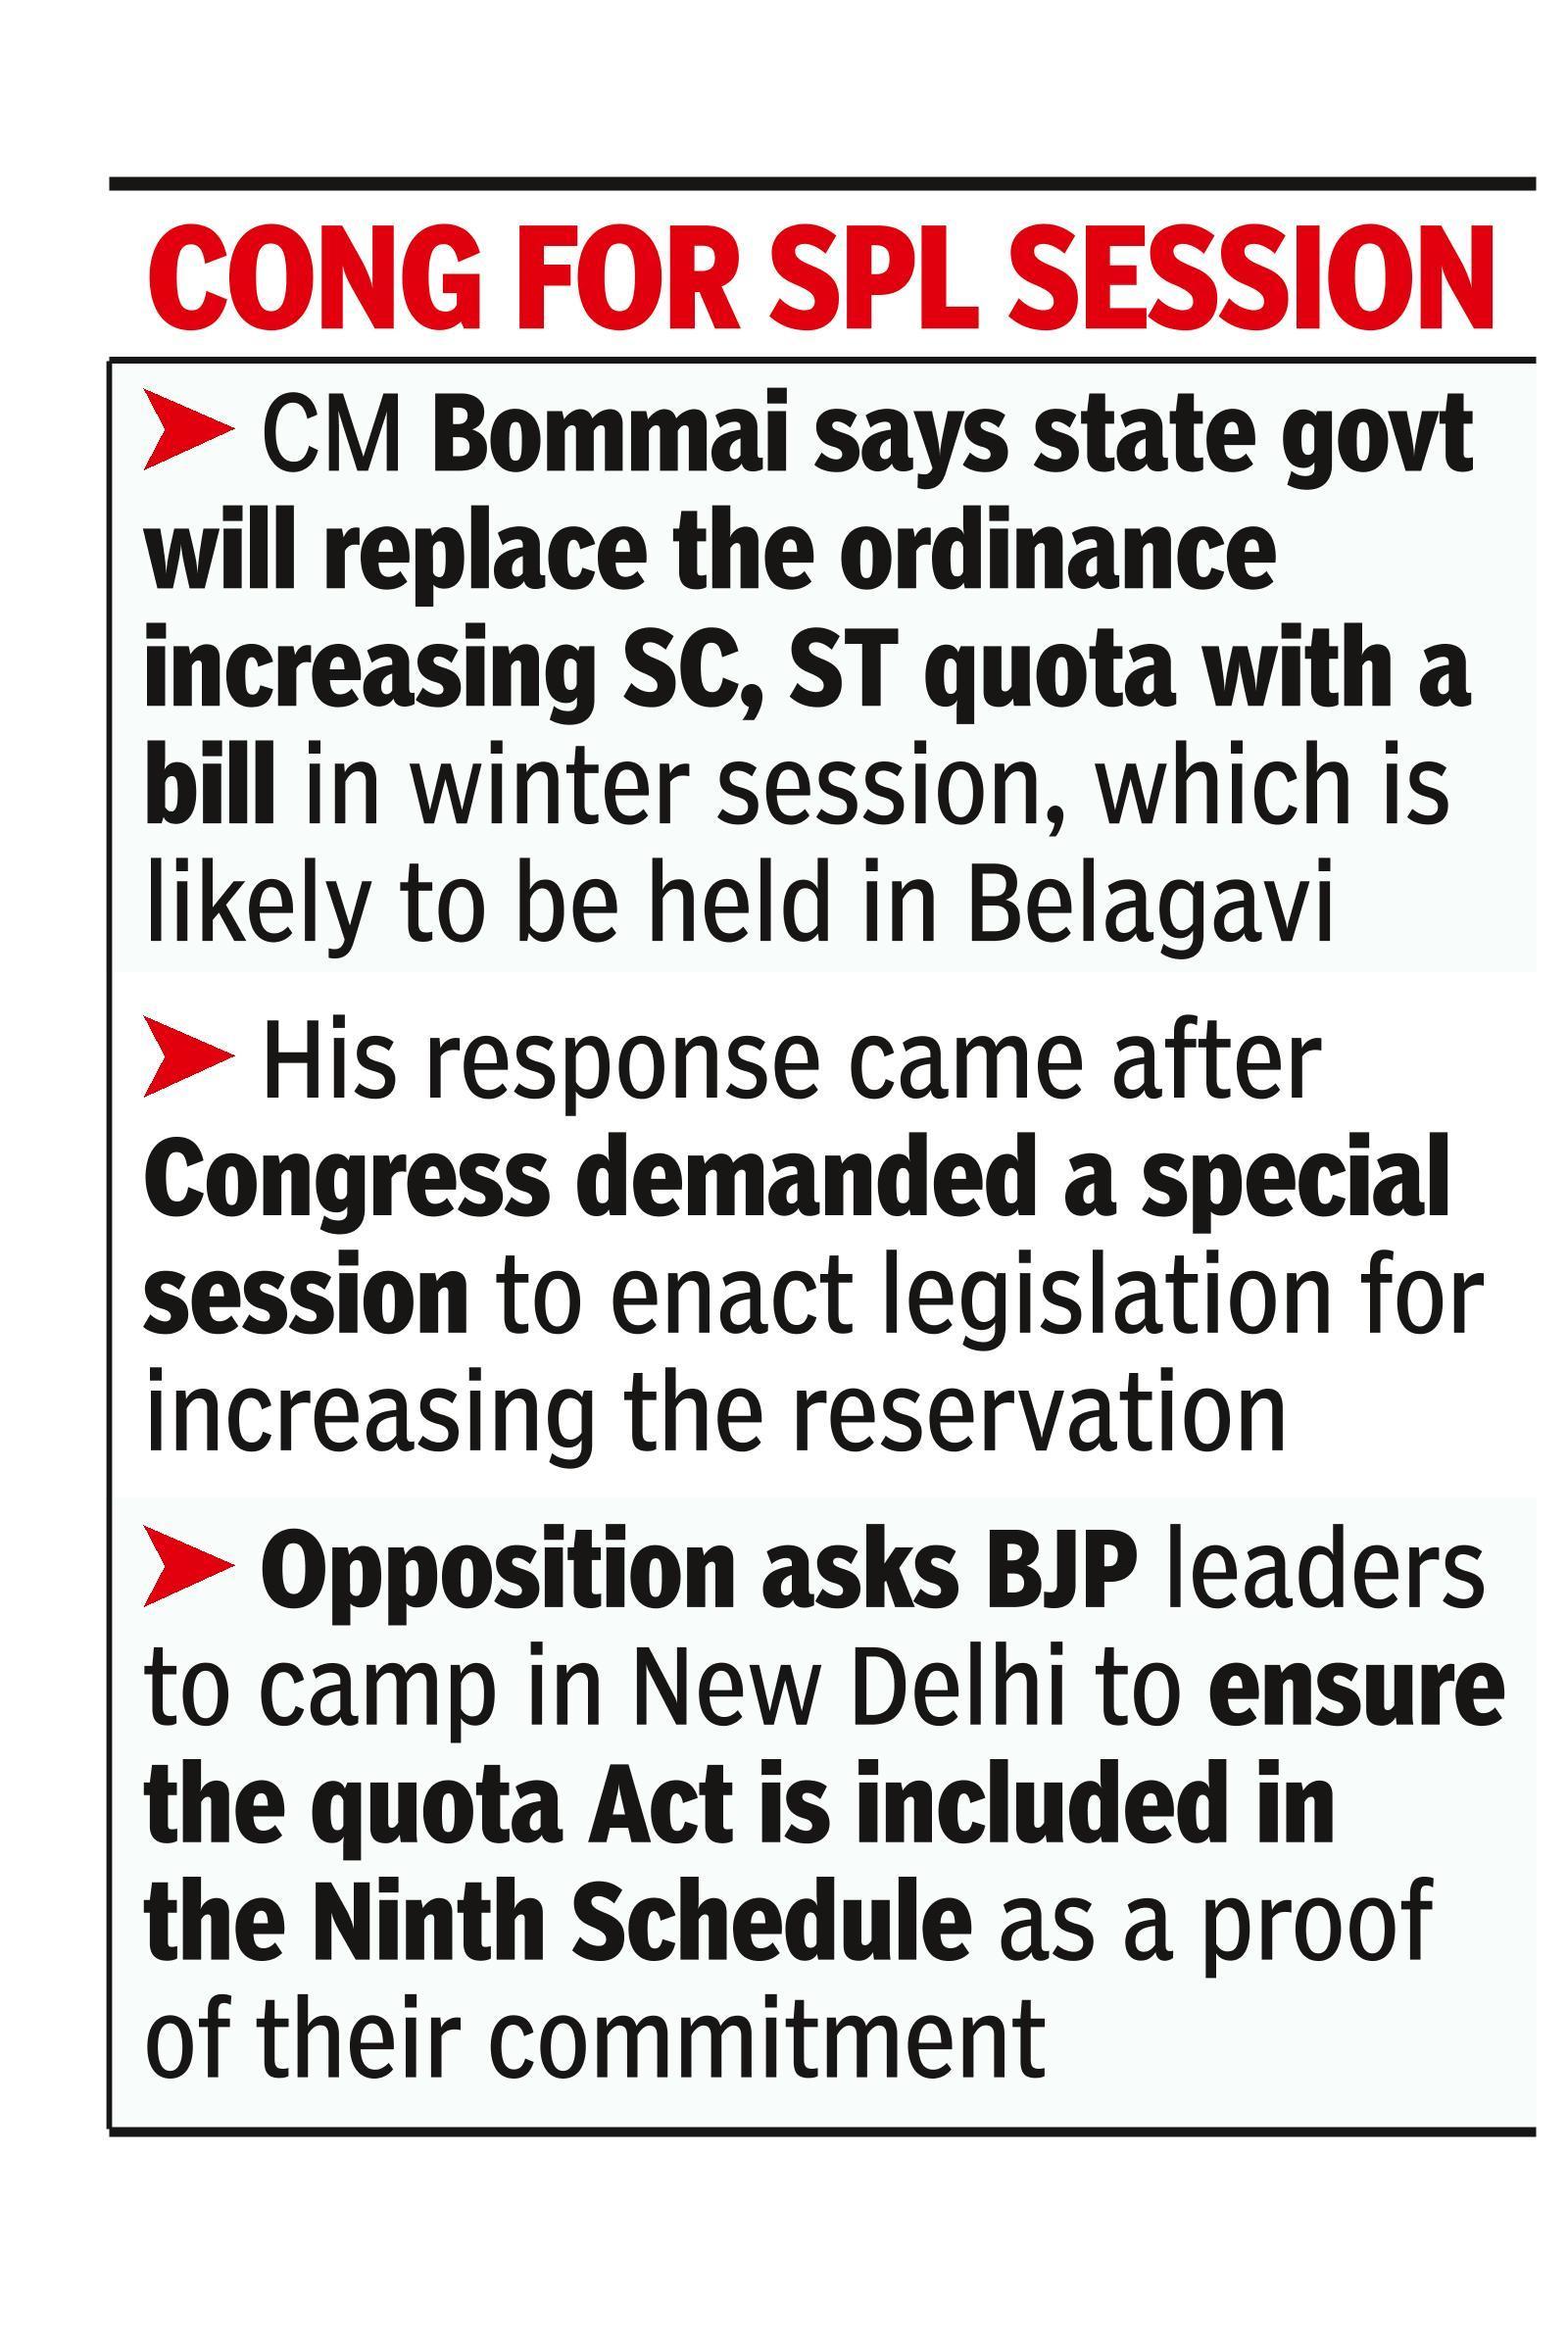 Will replace SC/ST quota hike ordinance with a bill: Bommai